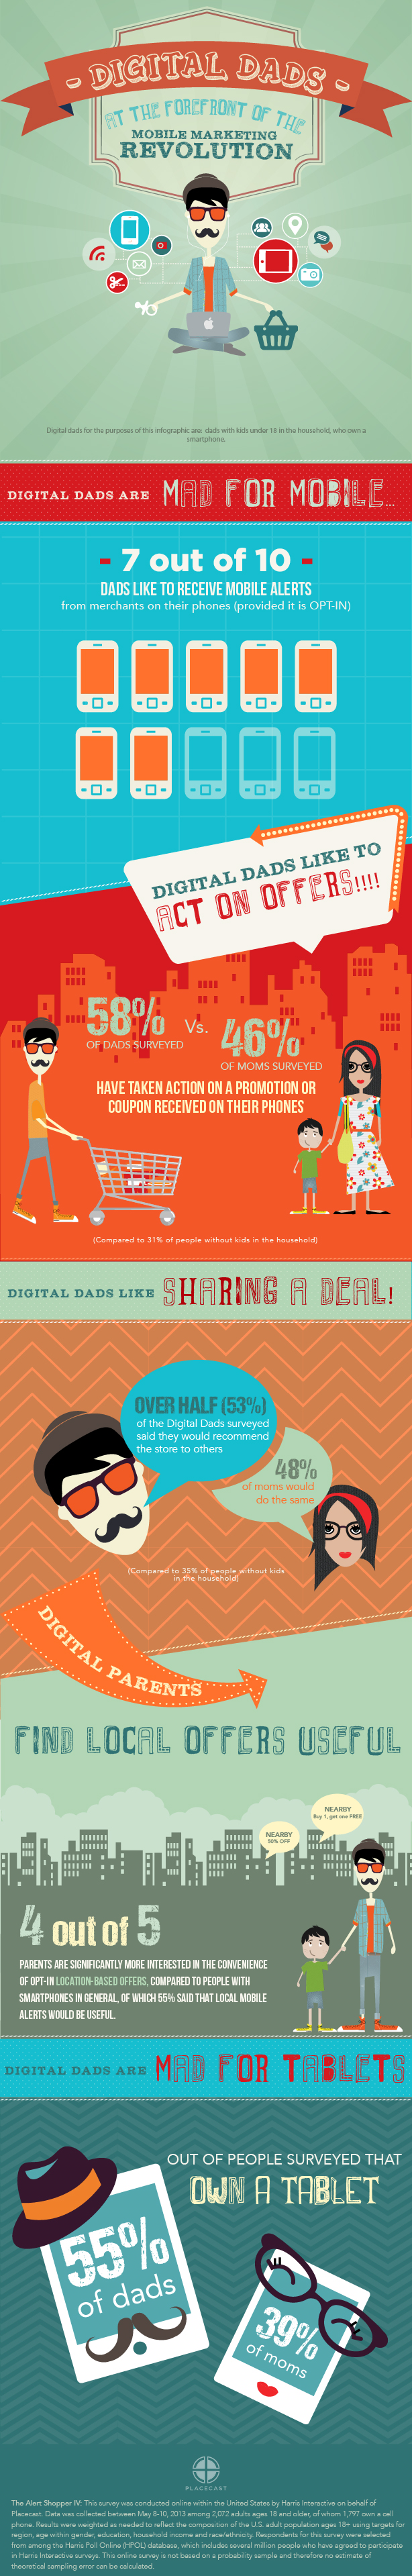 Digital Dads at the Forefront of the Mobile Marketing Revolution